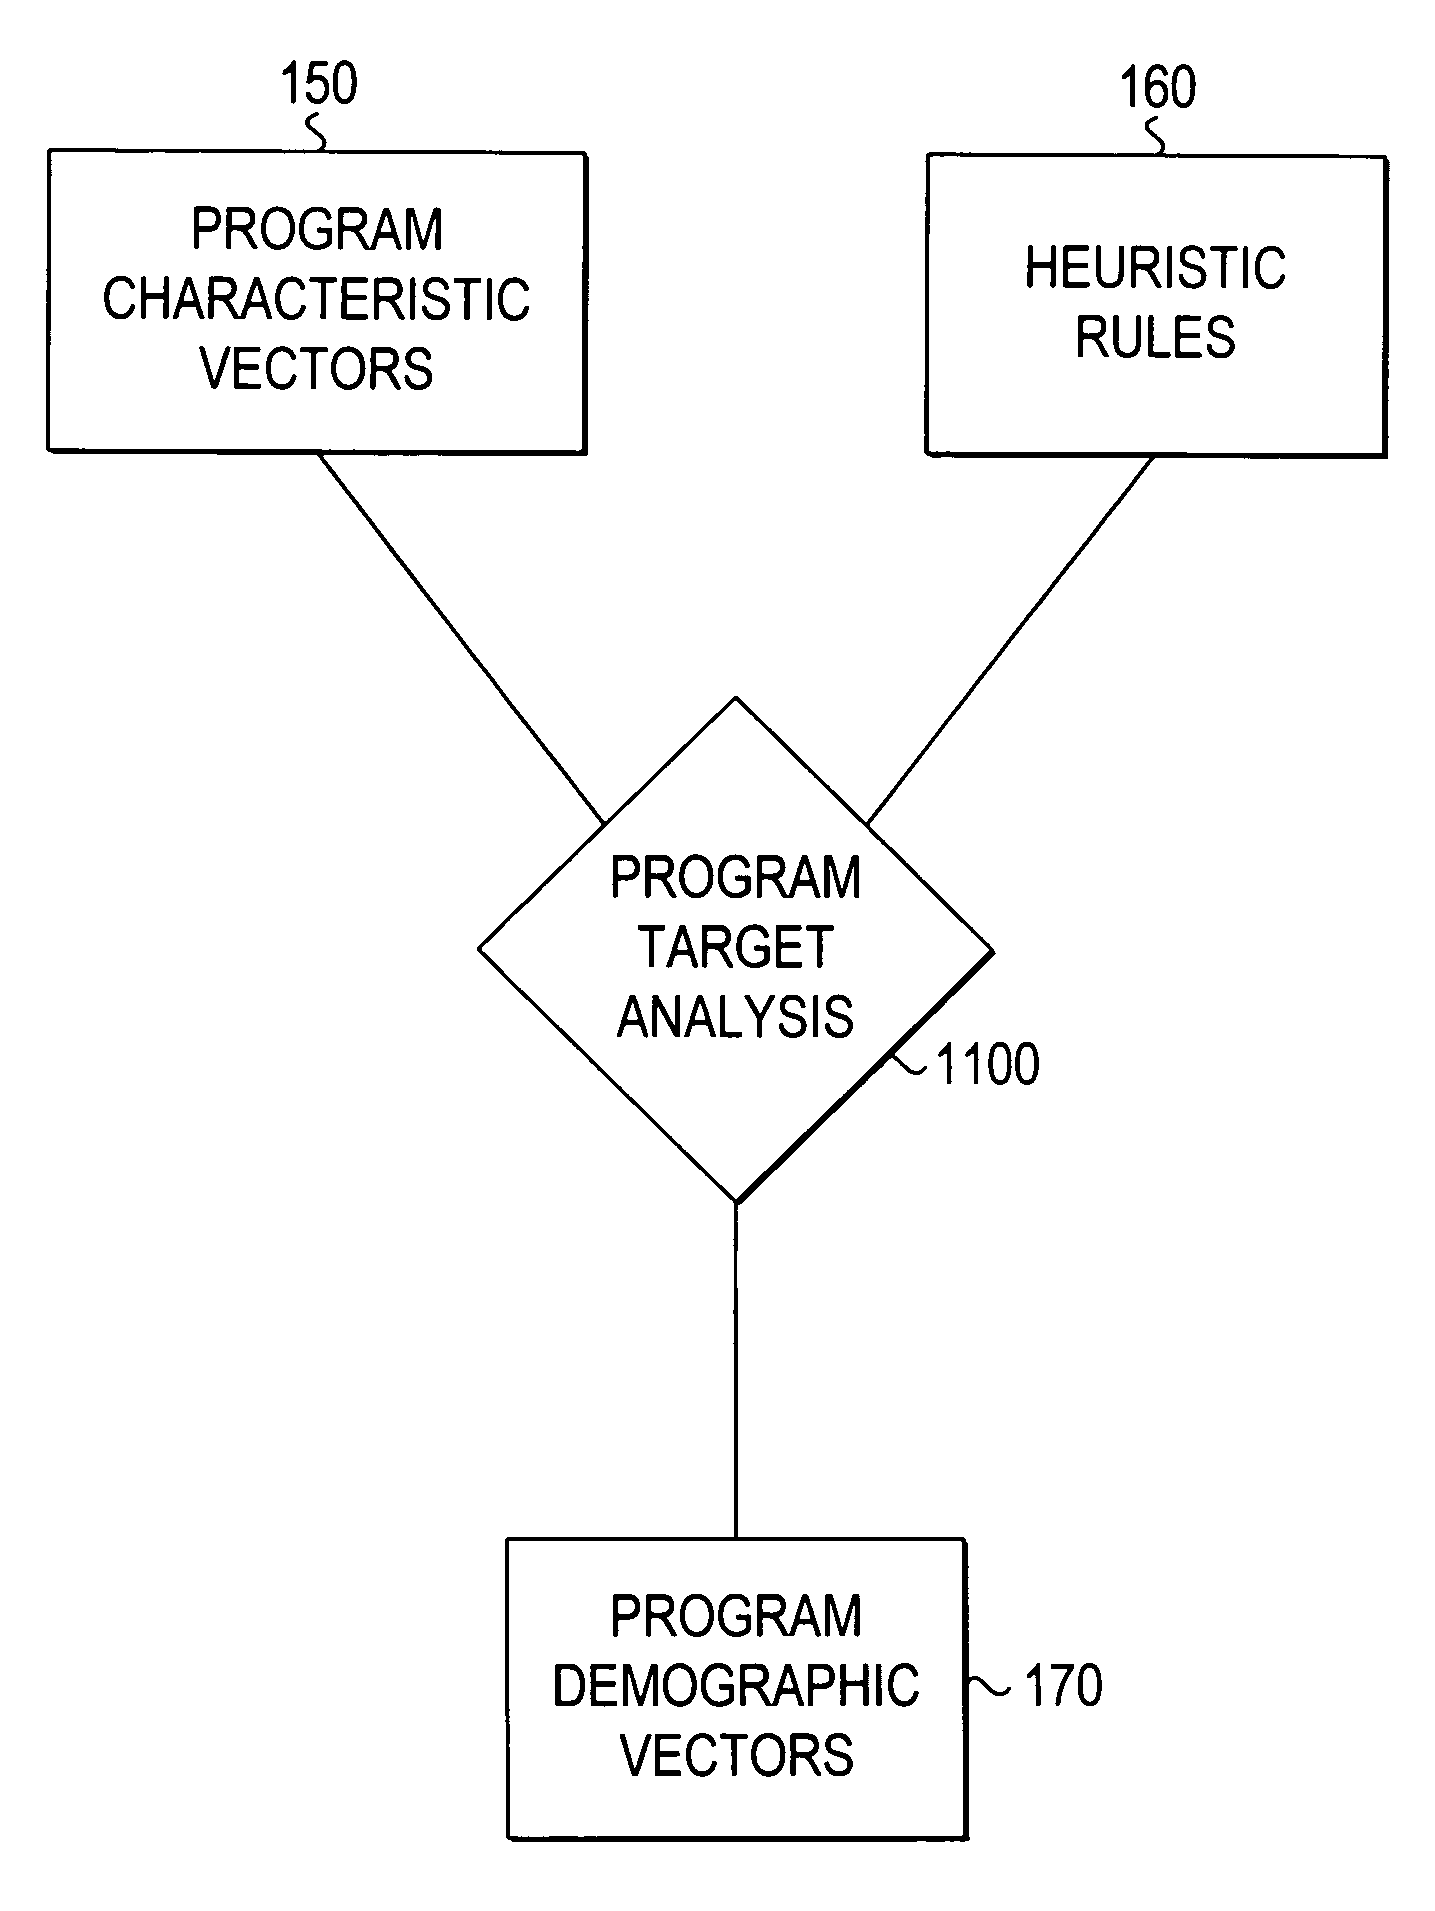 Subscriber characterization system with filters